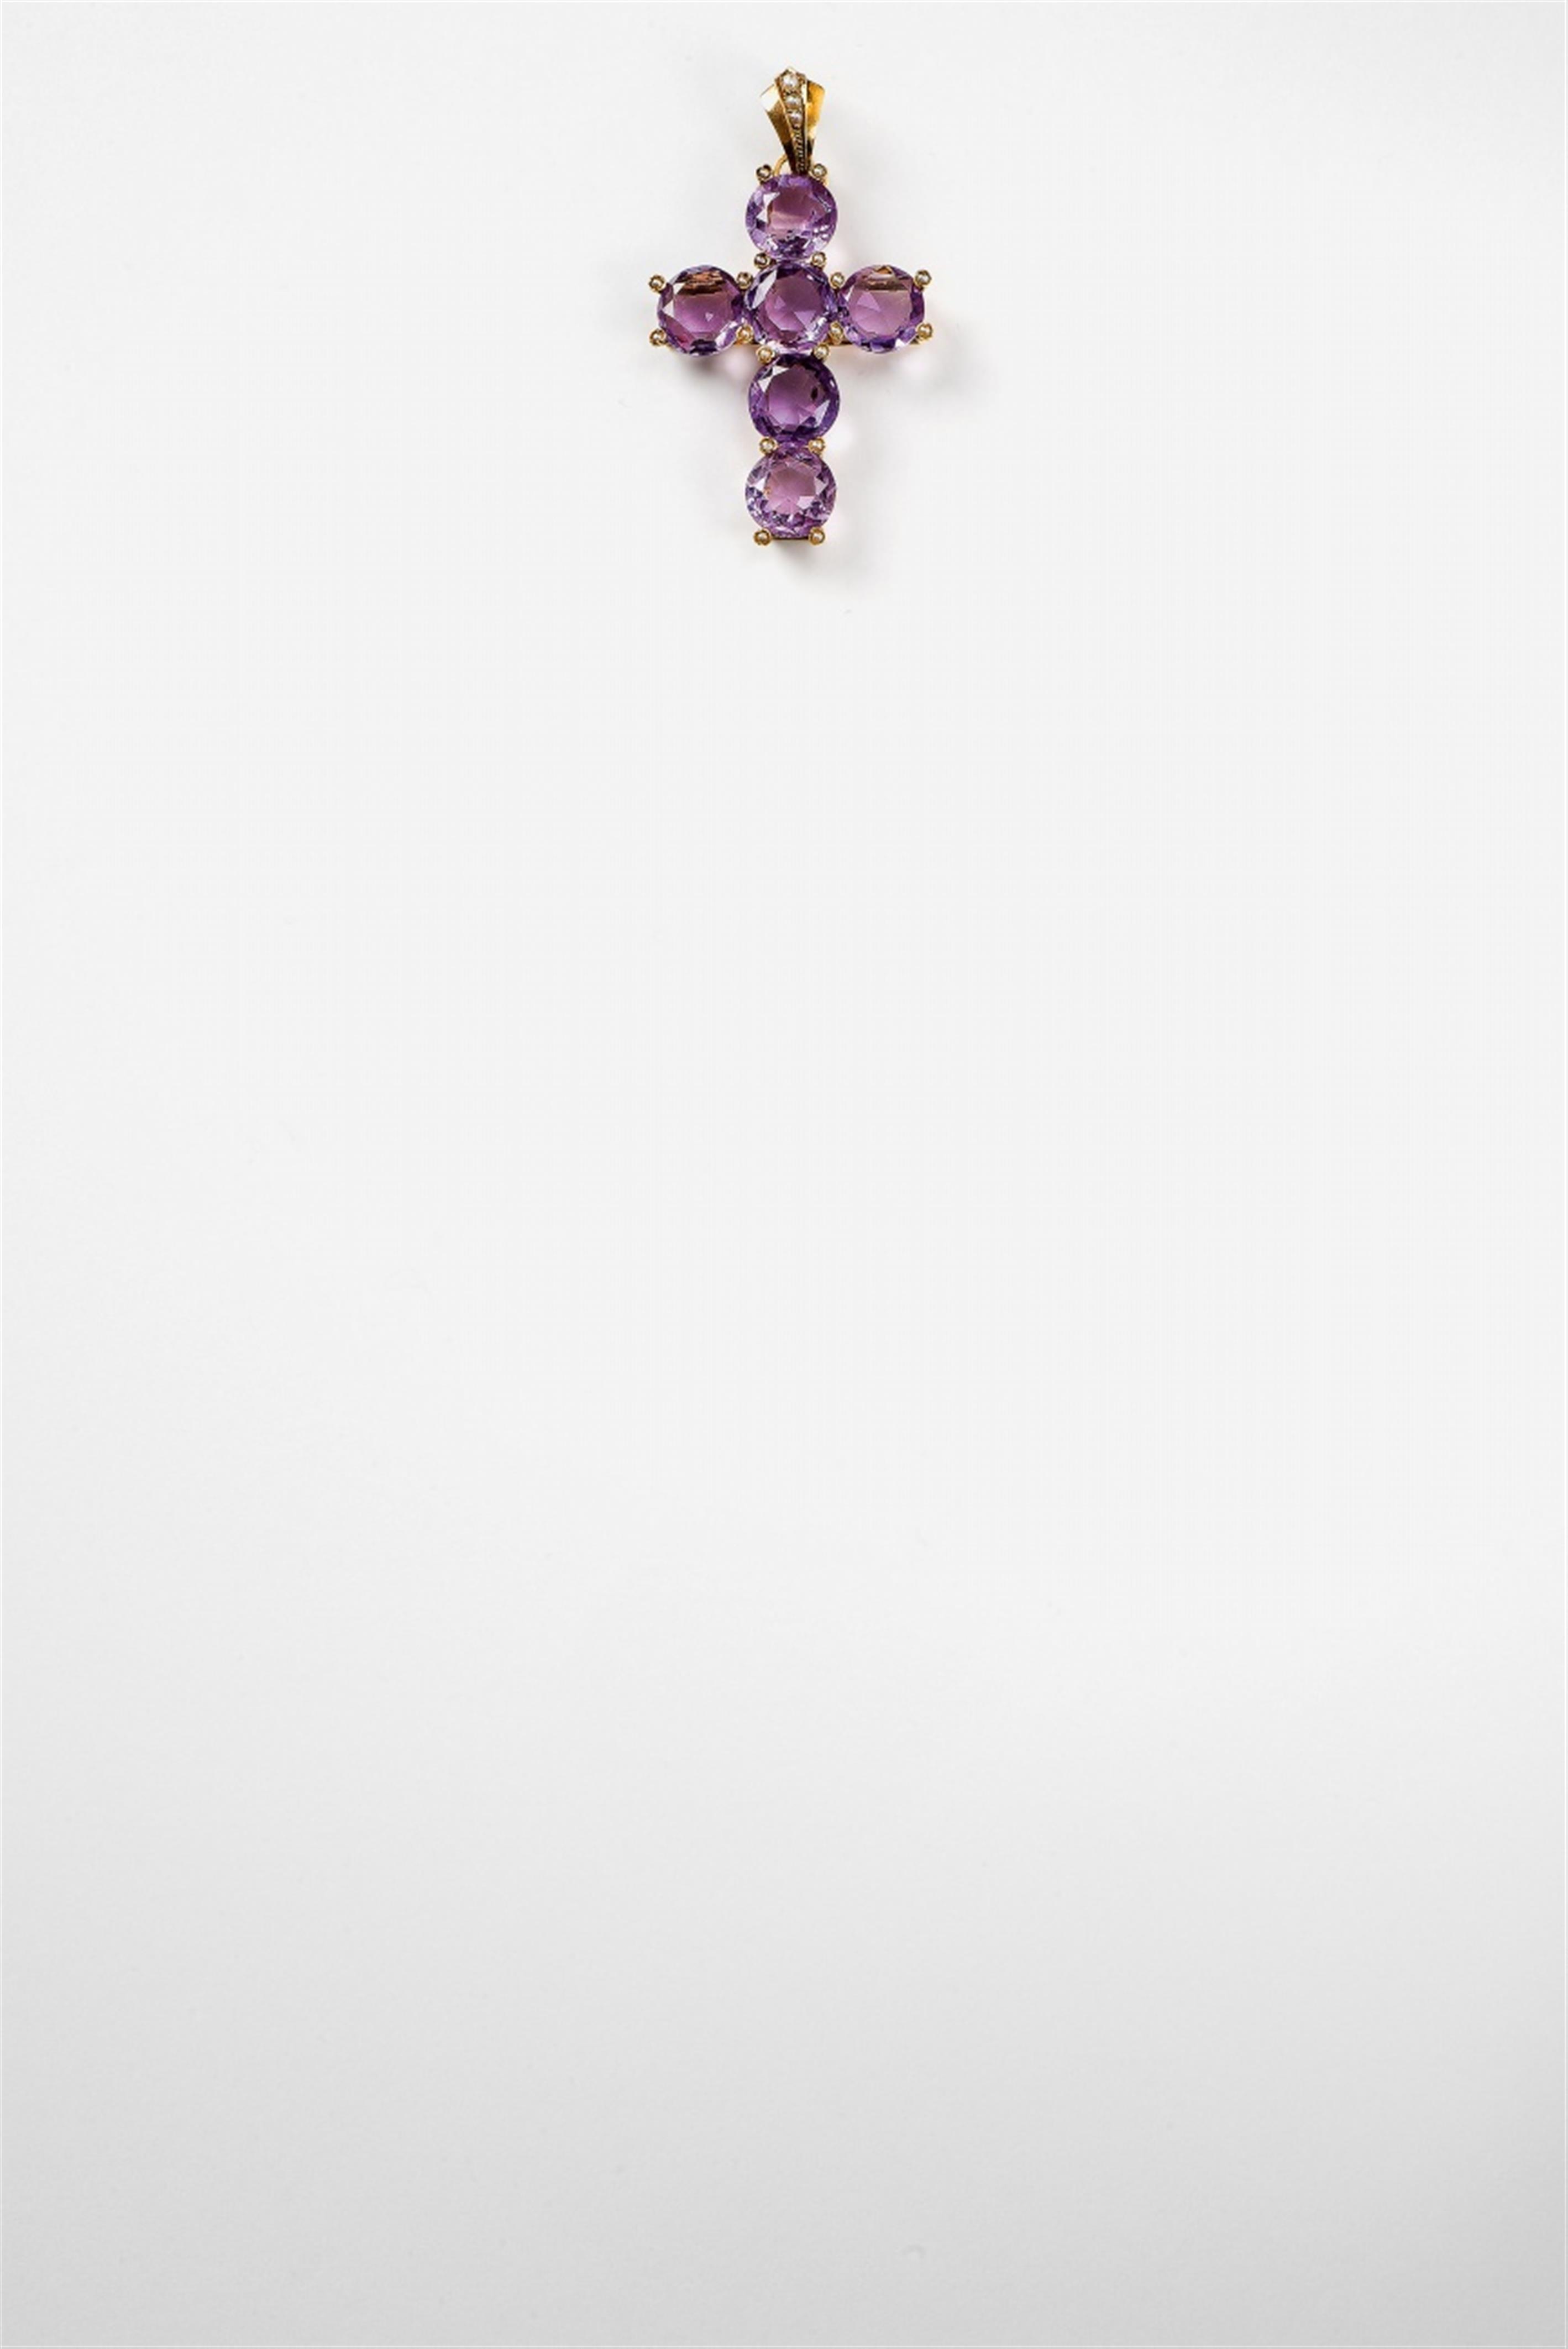 A 14k gold and amethyst cross pendant - image-2